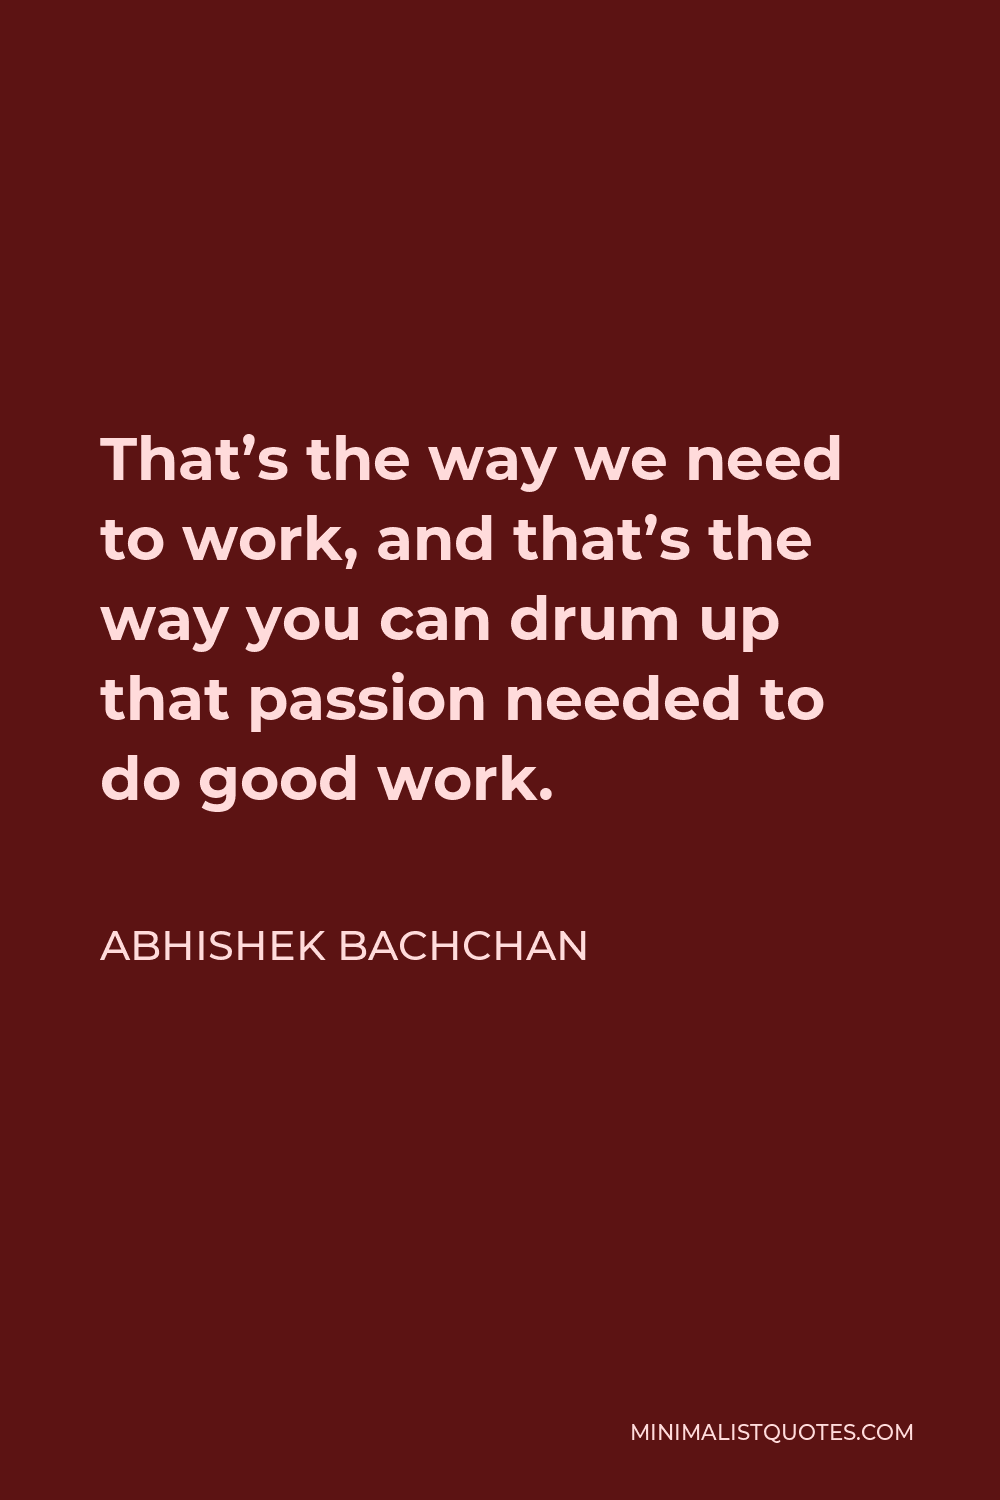 Abhishek Bachchan Quote - That’s the way we need to work, and that’s the way you can drum up that passion needed to do good work.